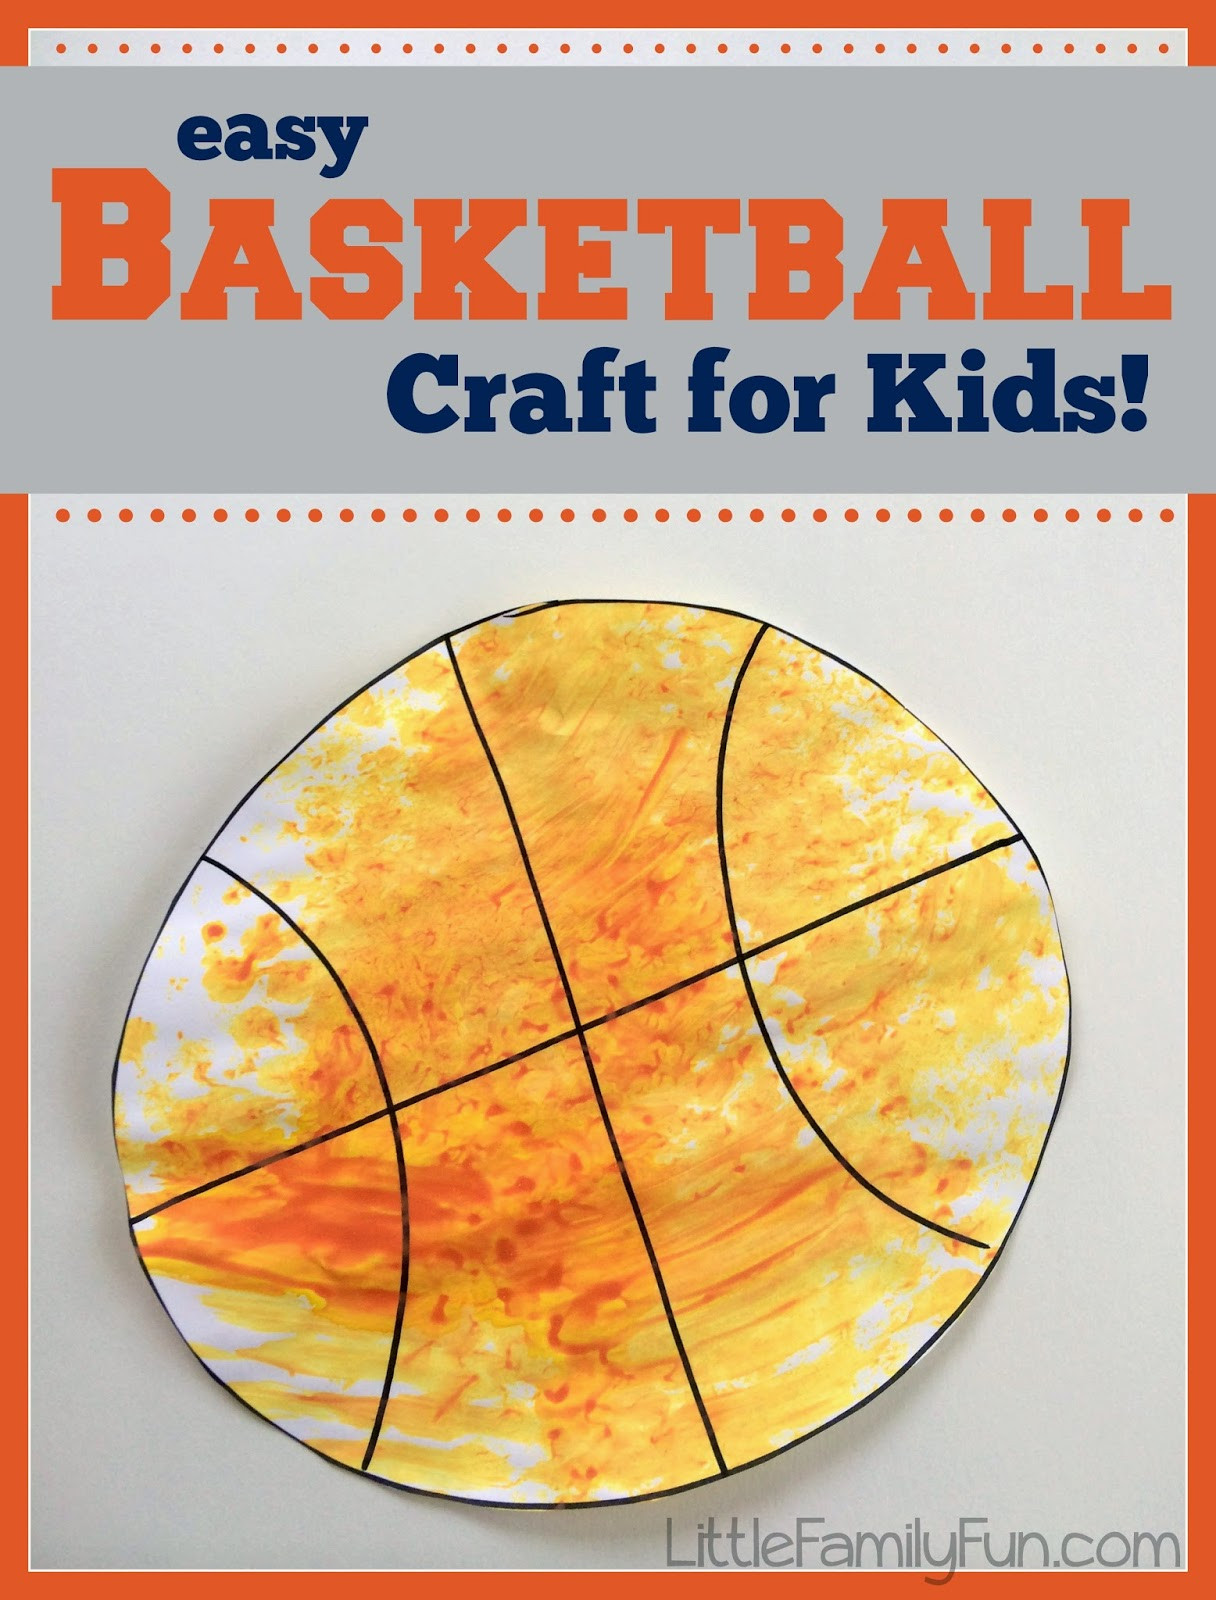 Sports Craft For Toddlers
 Basketball Craft for Kids